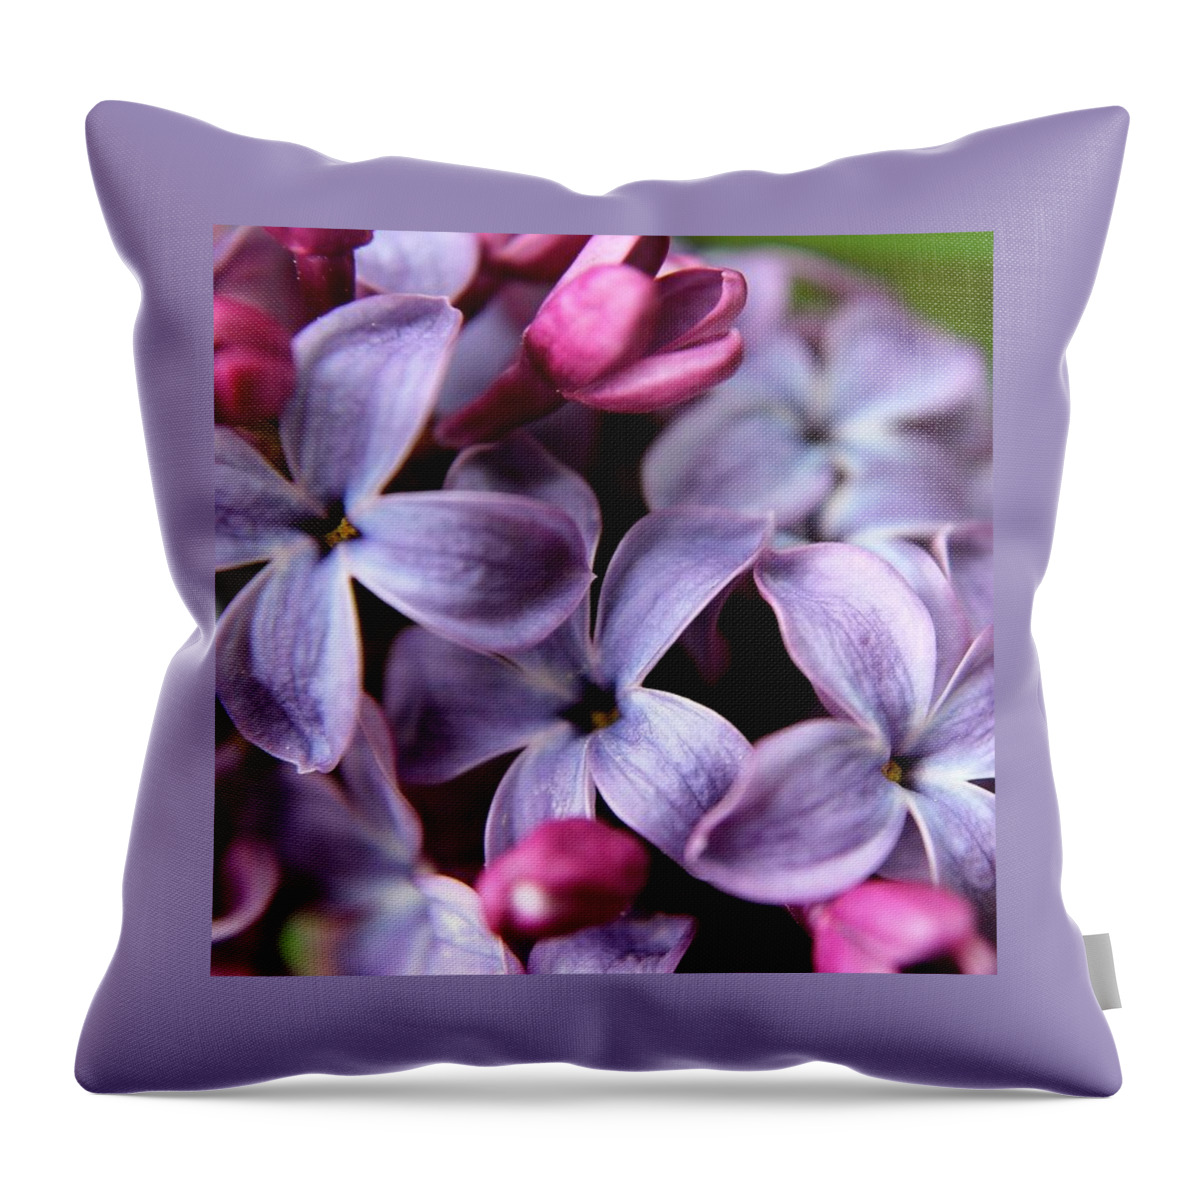 Macro Throw Pillow featuring the photograph Macro Lilac by Justin Connor